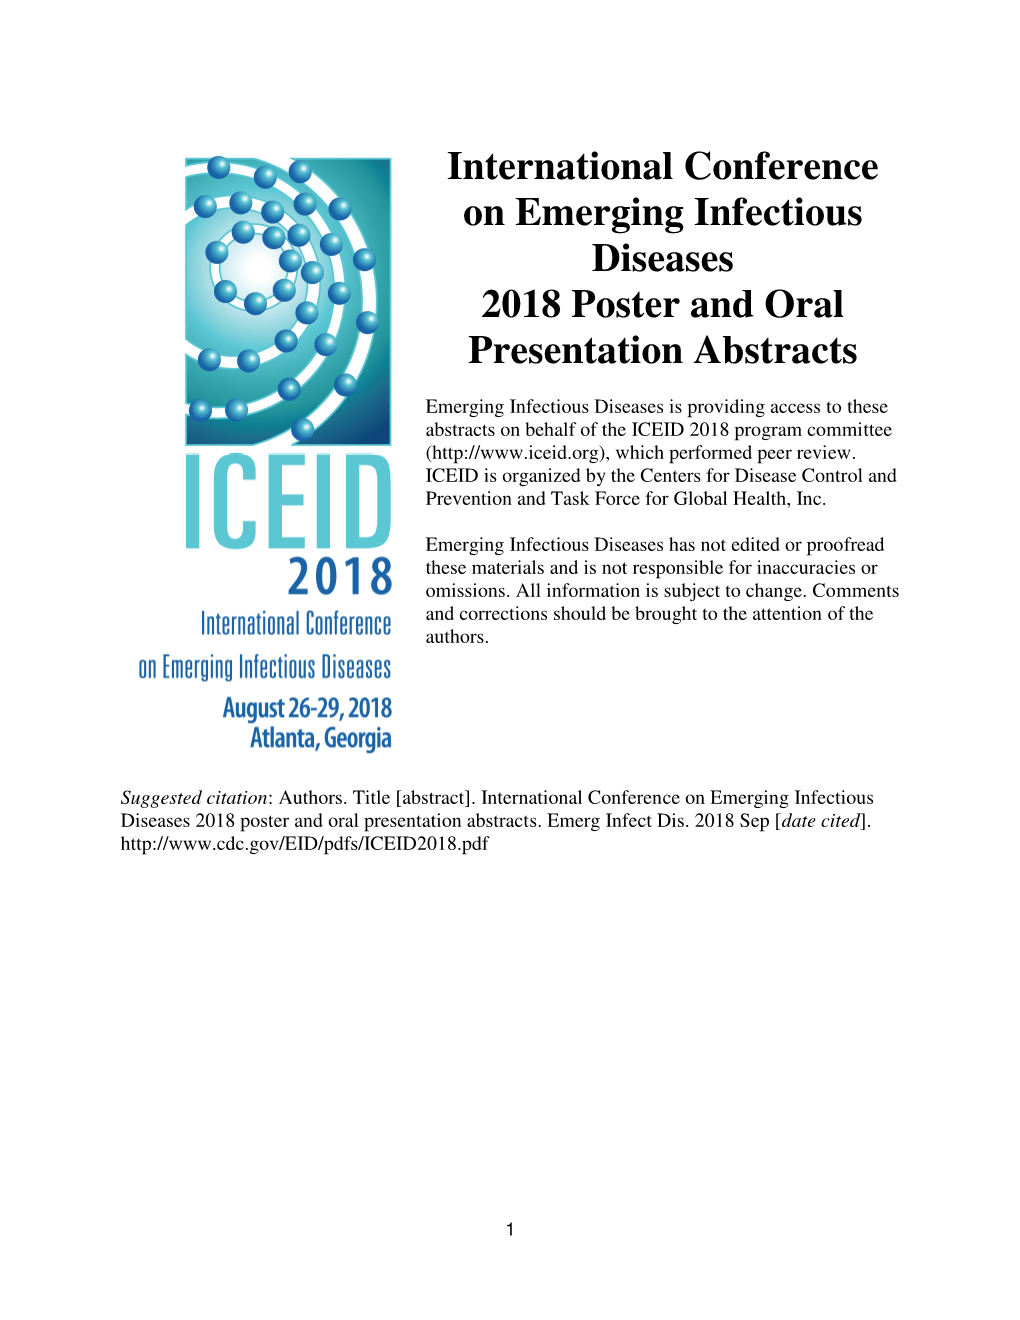 International Conference on Emerging Infectious Diseases 2018 Poster and Oral Presentation Abstracts